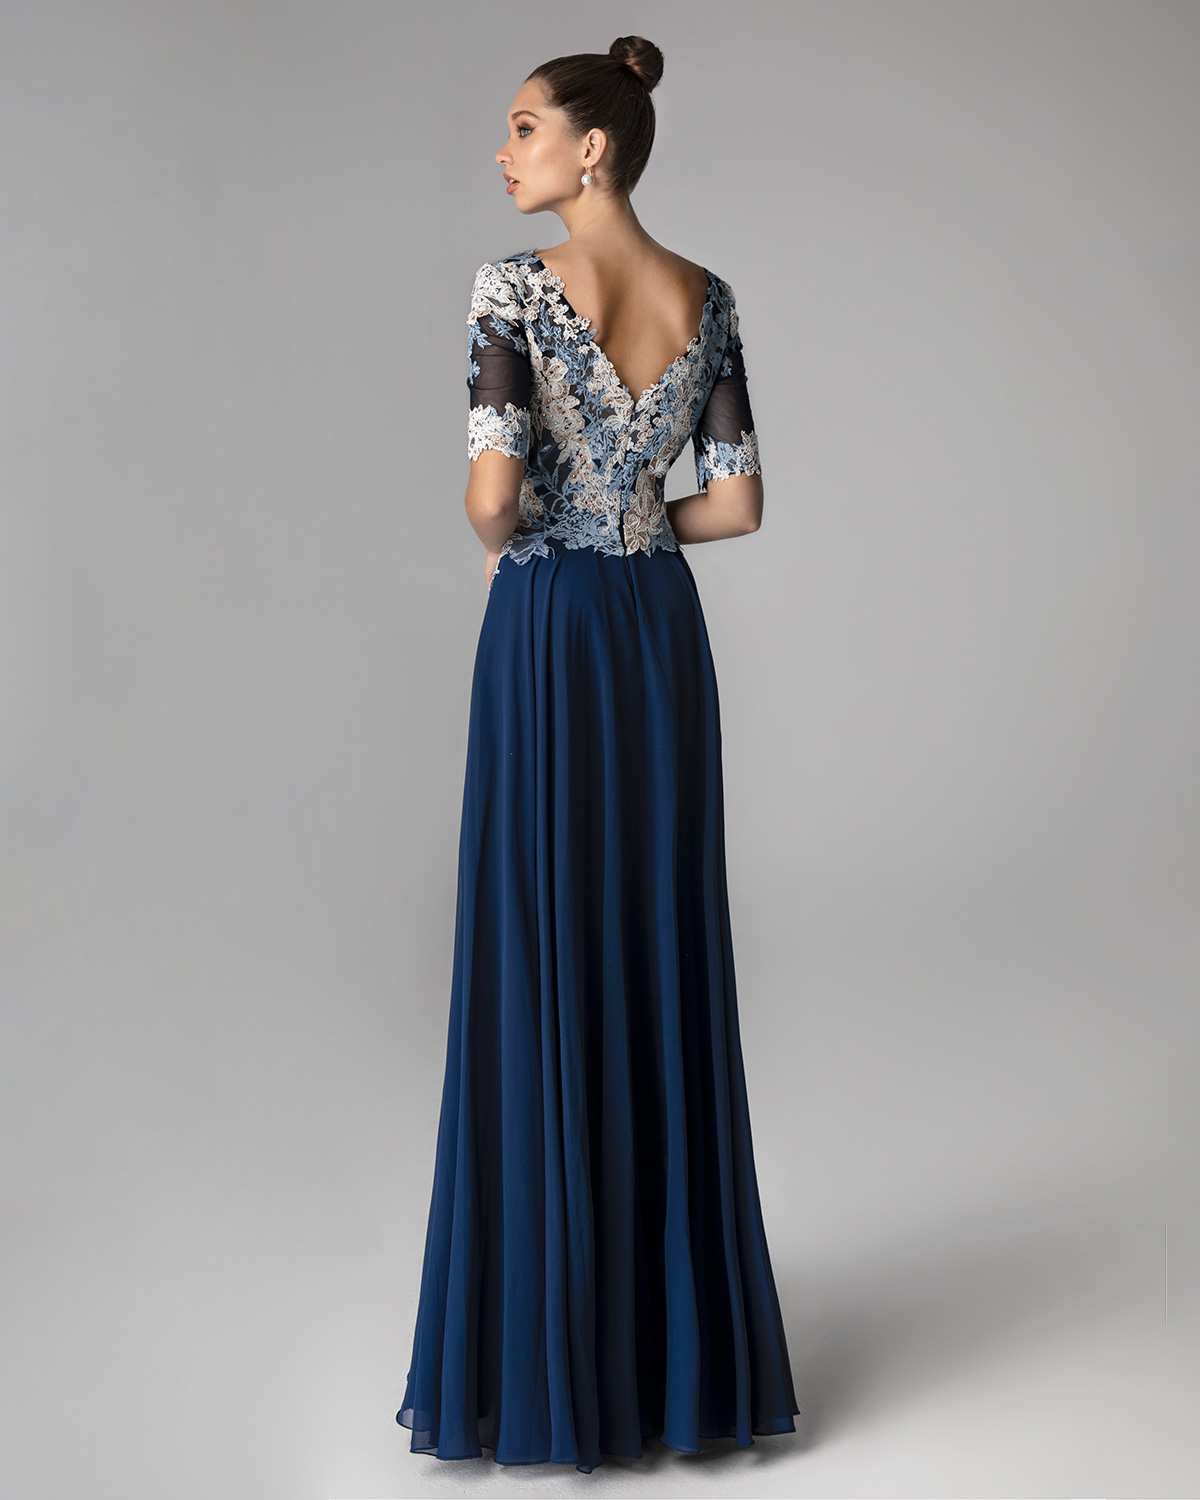 Classic Dresses / Long evening dress with applique lace on the top and short sleeves